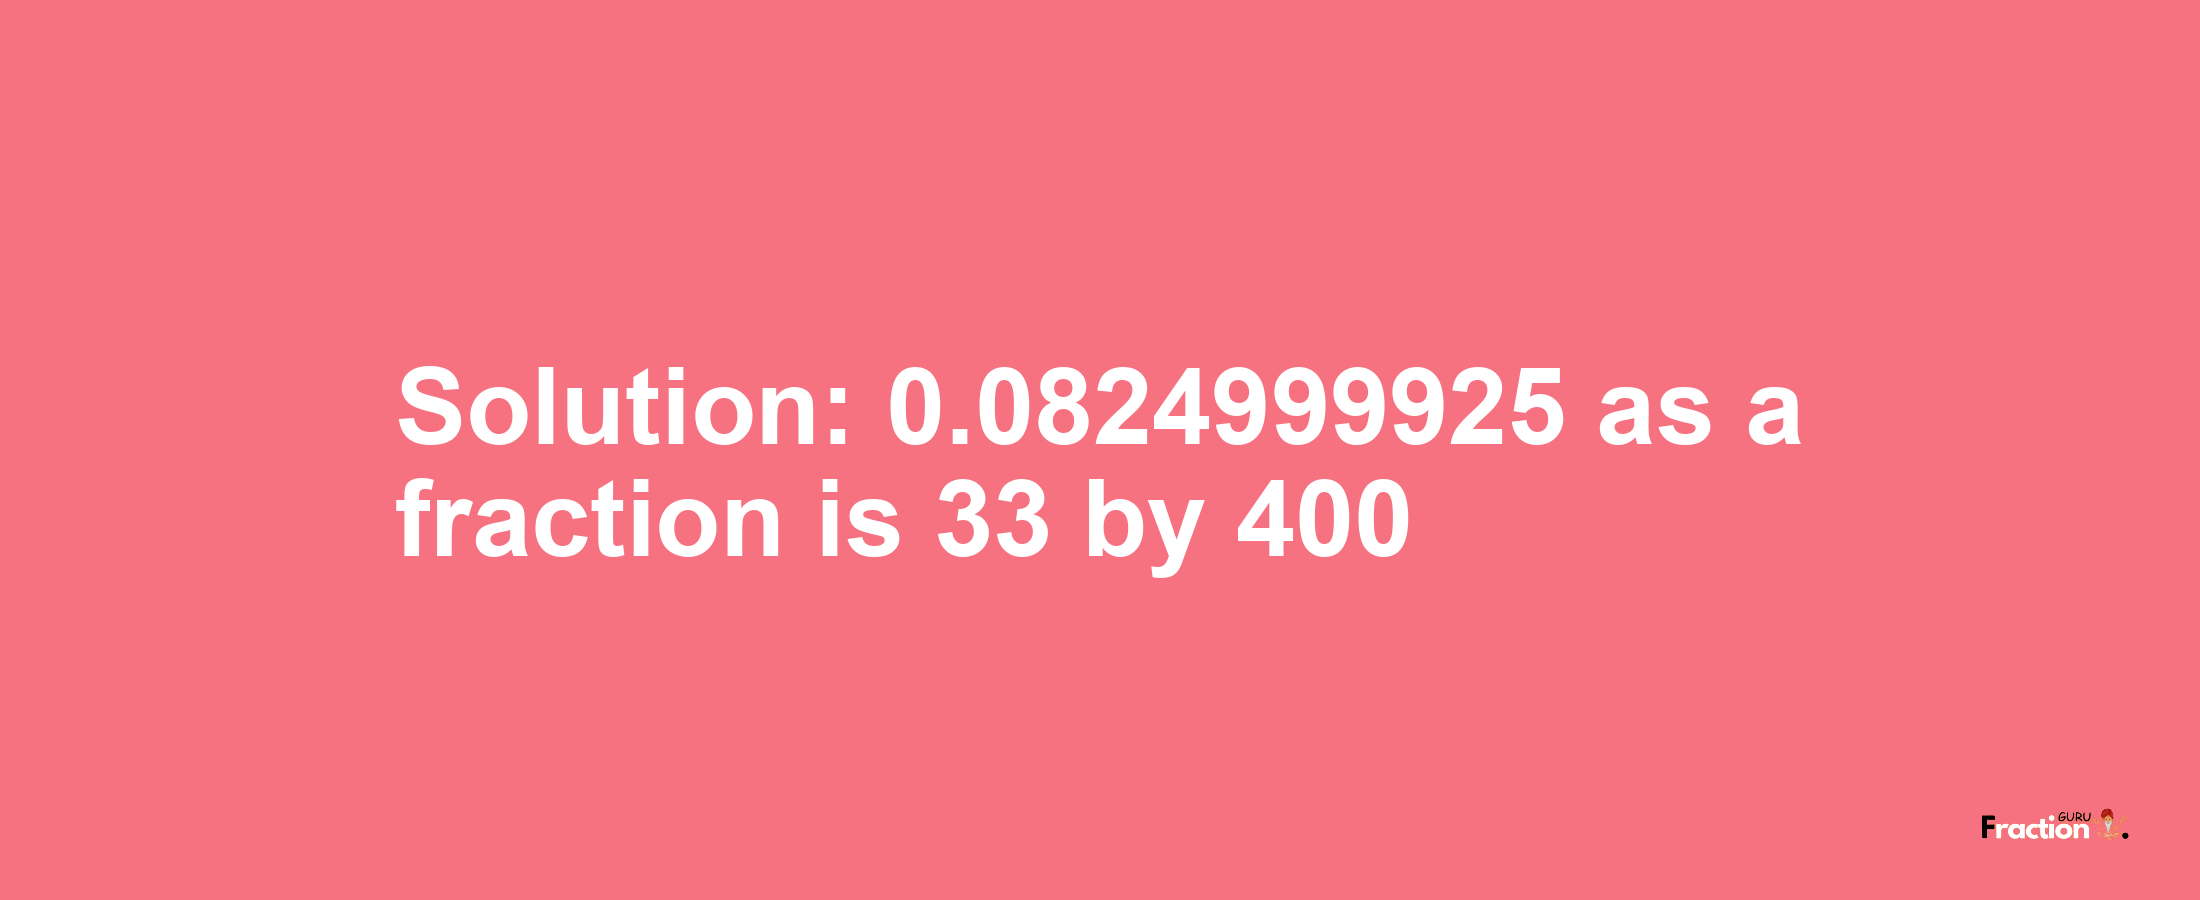 Solution:0.0824999925 as a fraction is 33/400